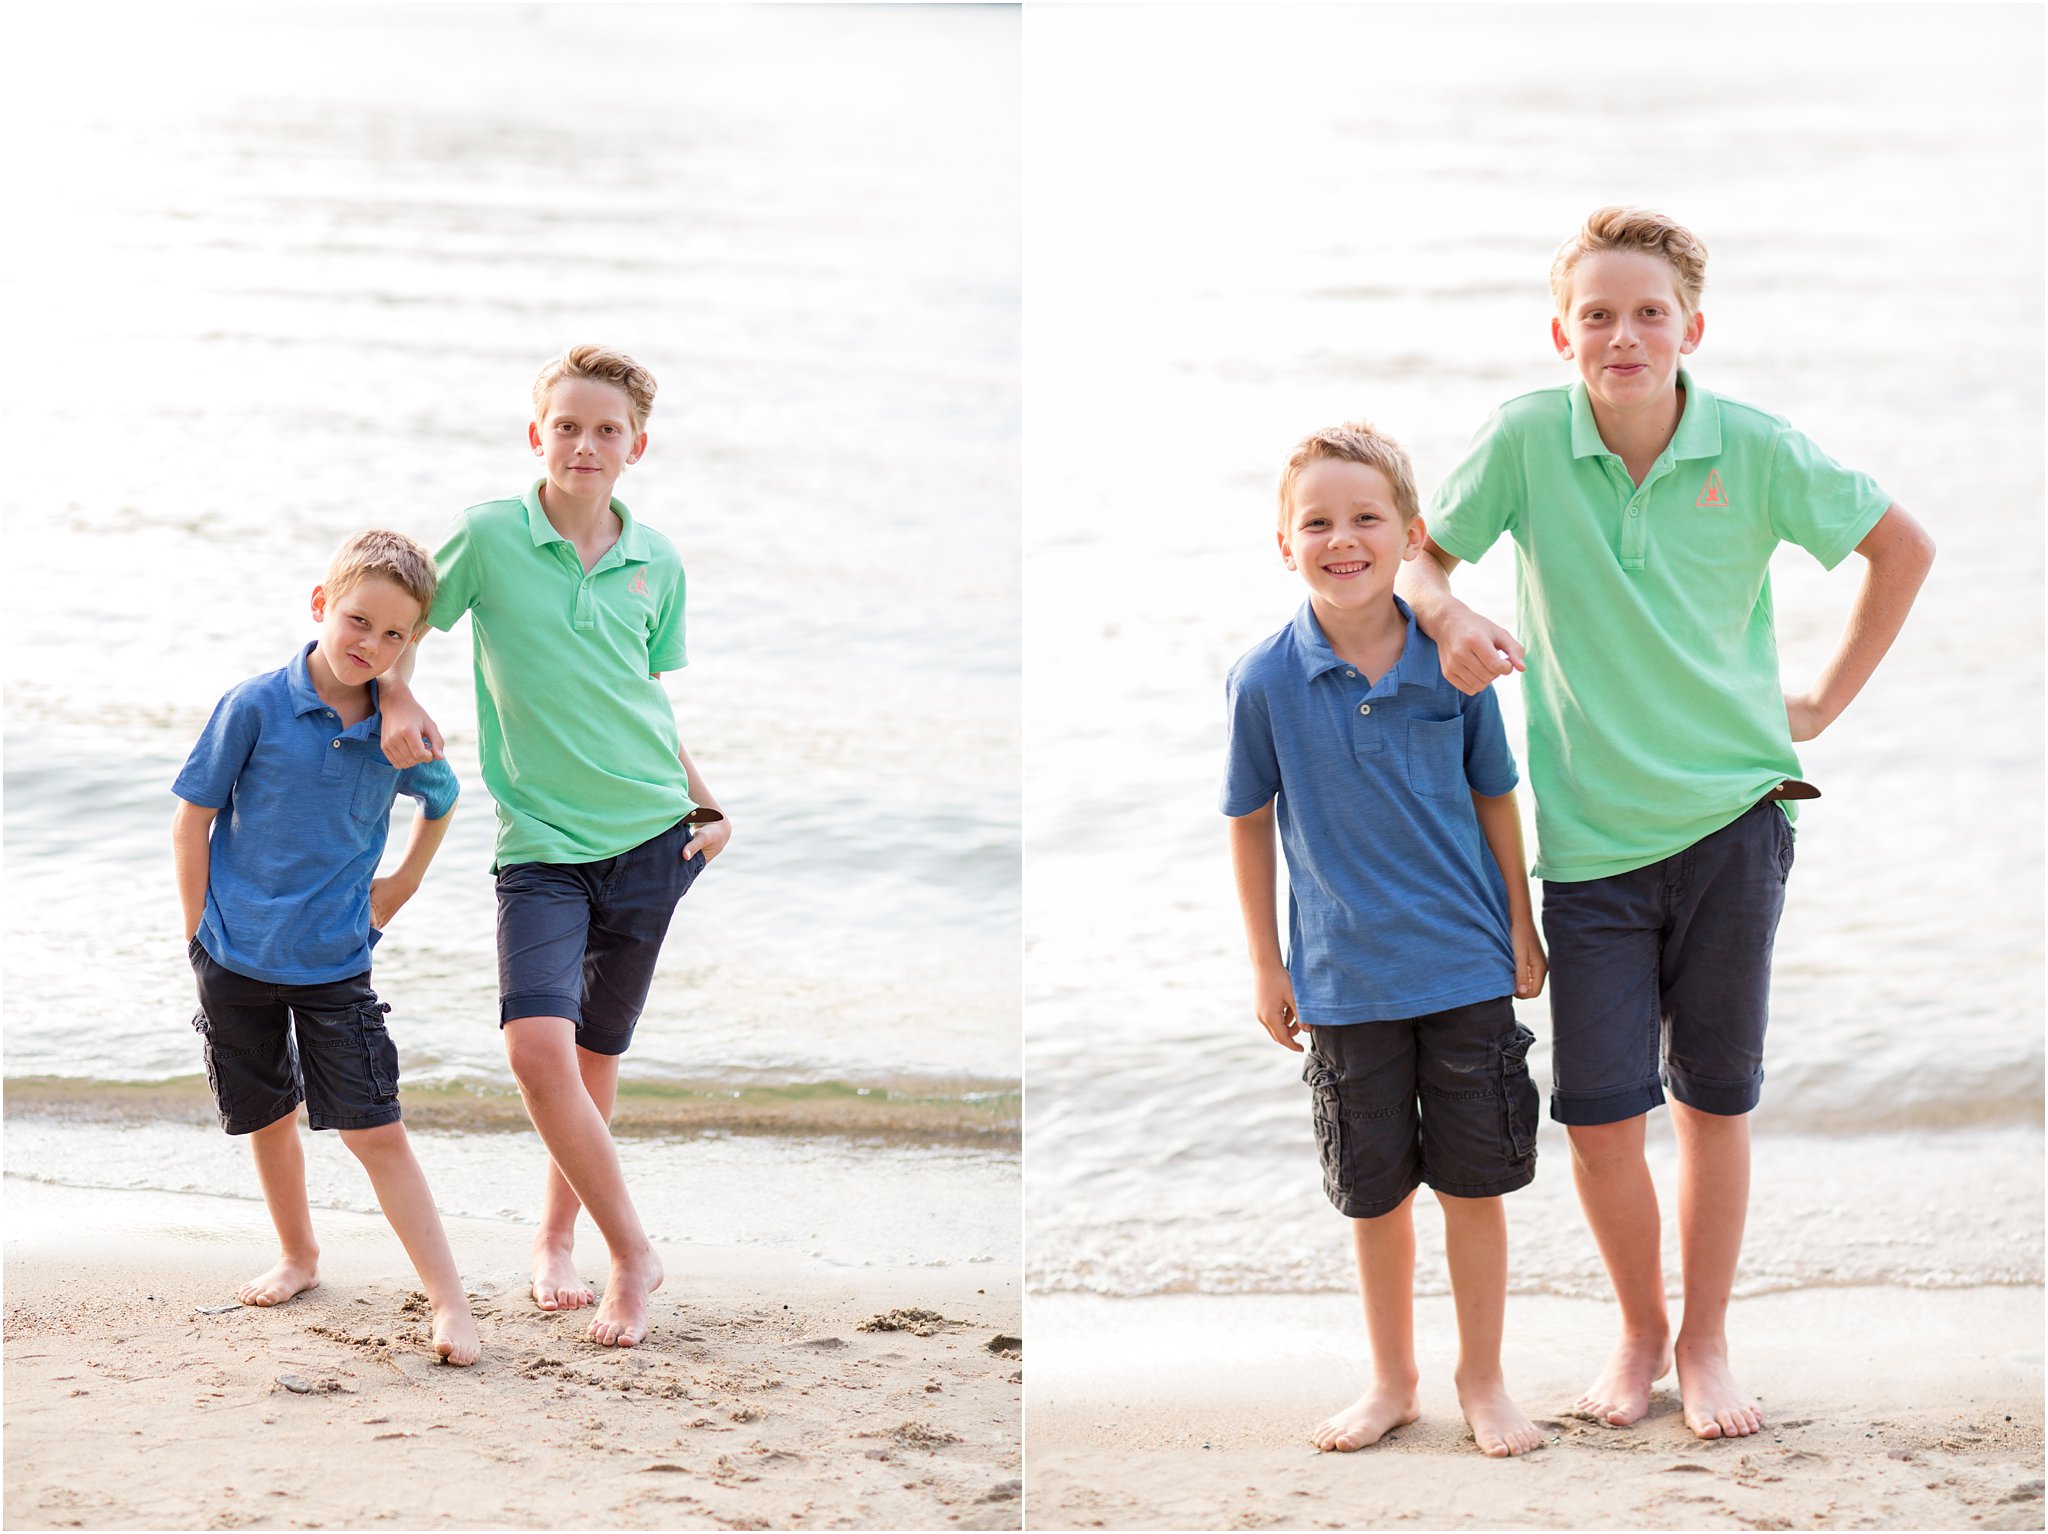 Boys on a Beach in New Hampshire